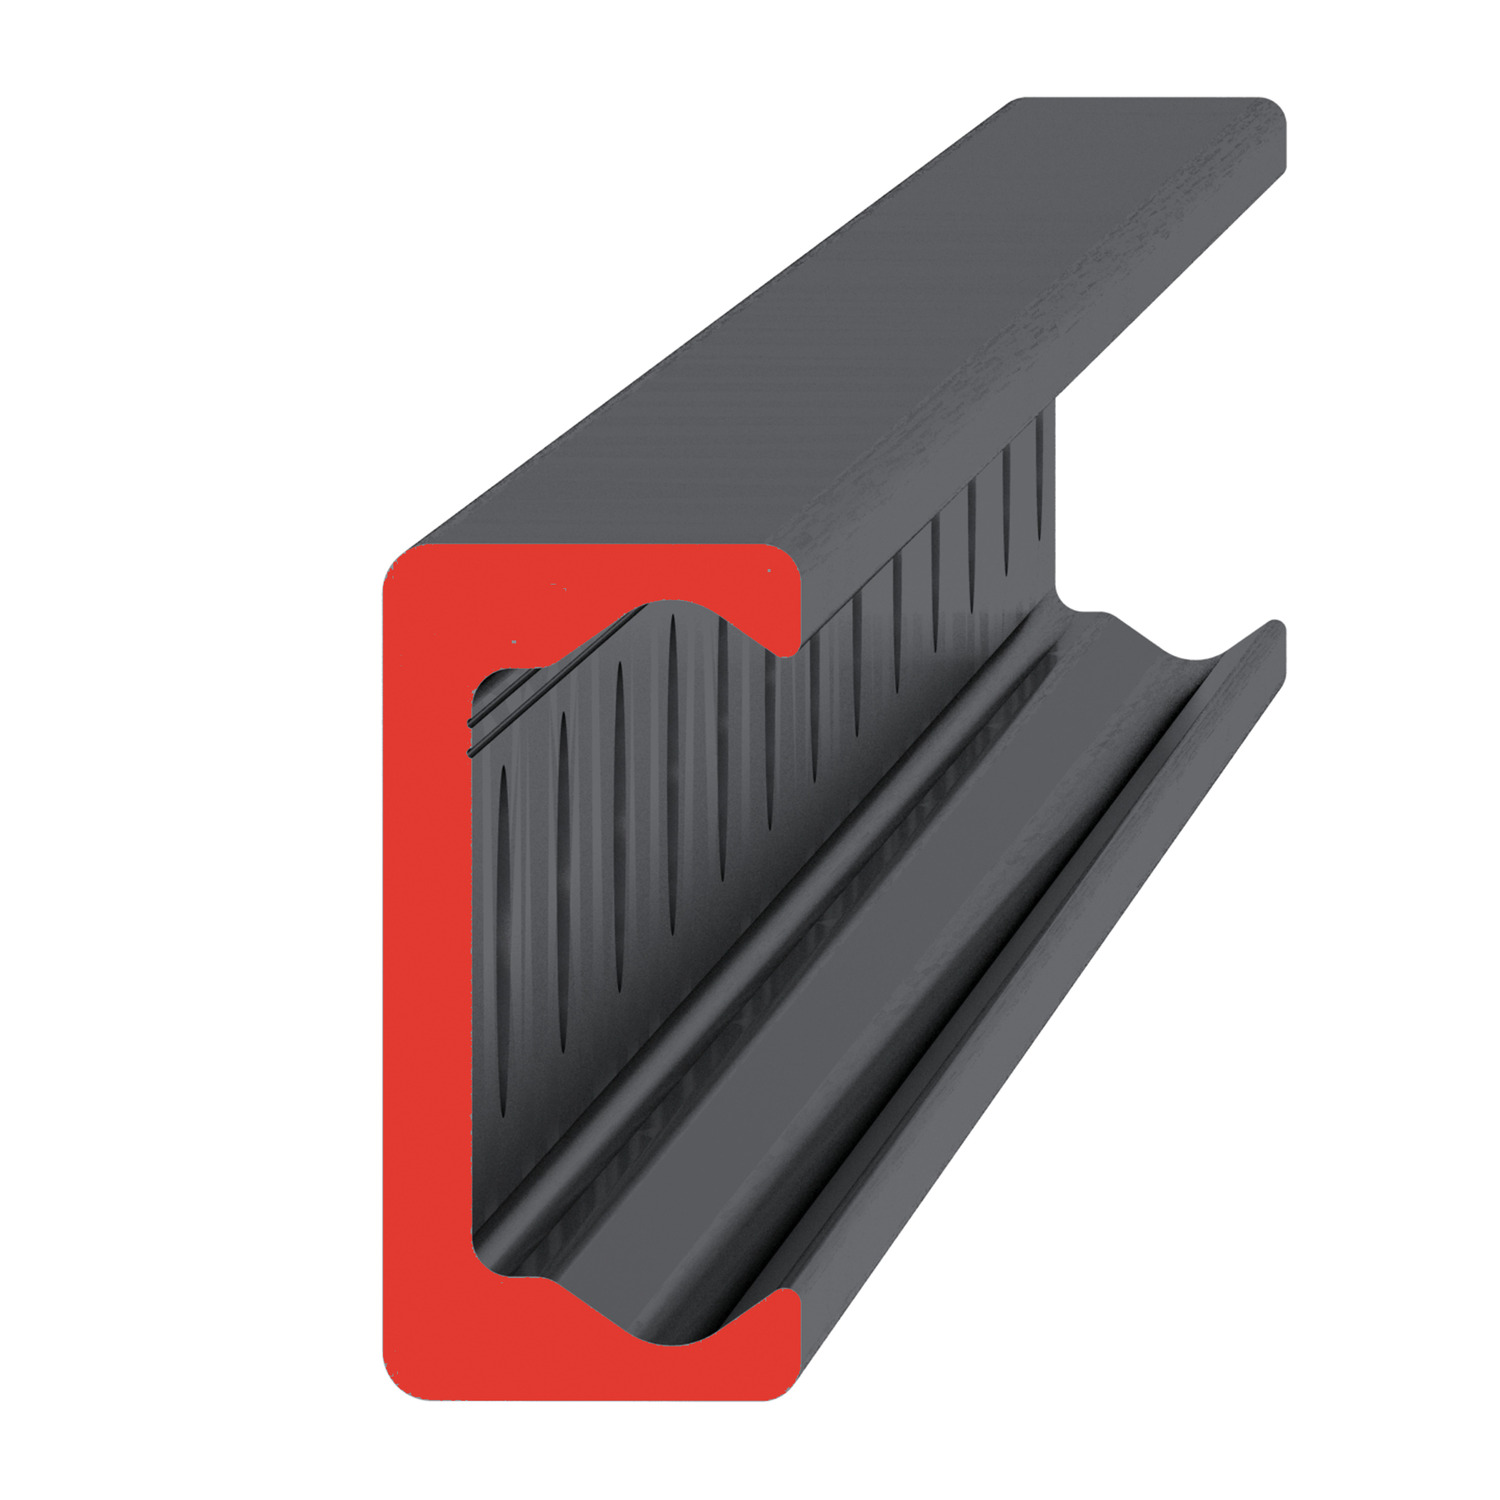 Product L1943.43, Heavy Duty T Rail counterbored holes / 